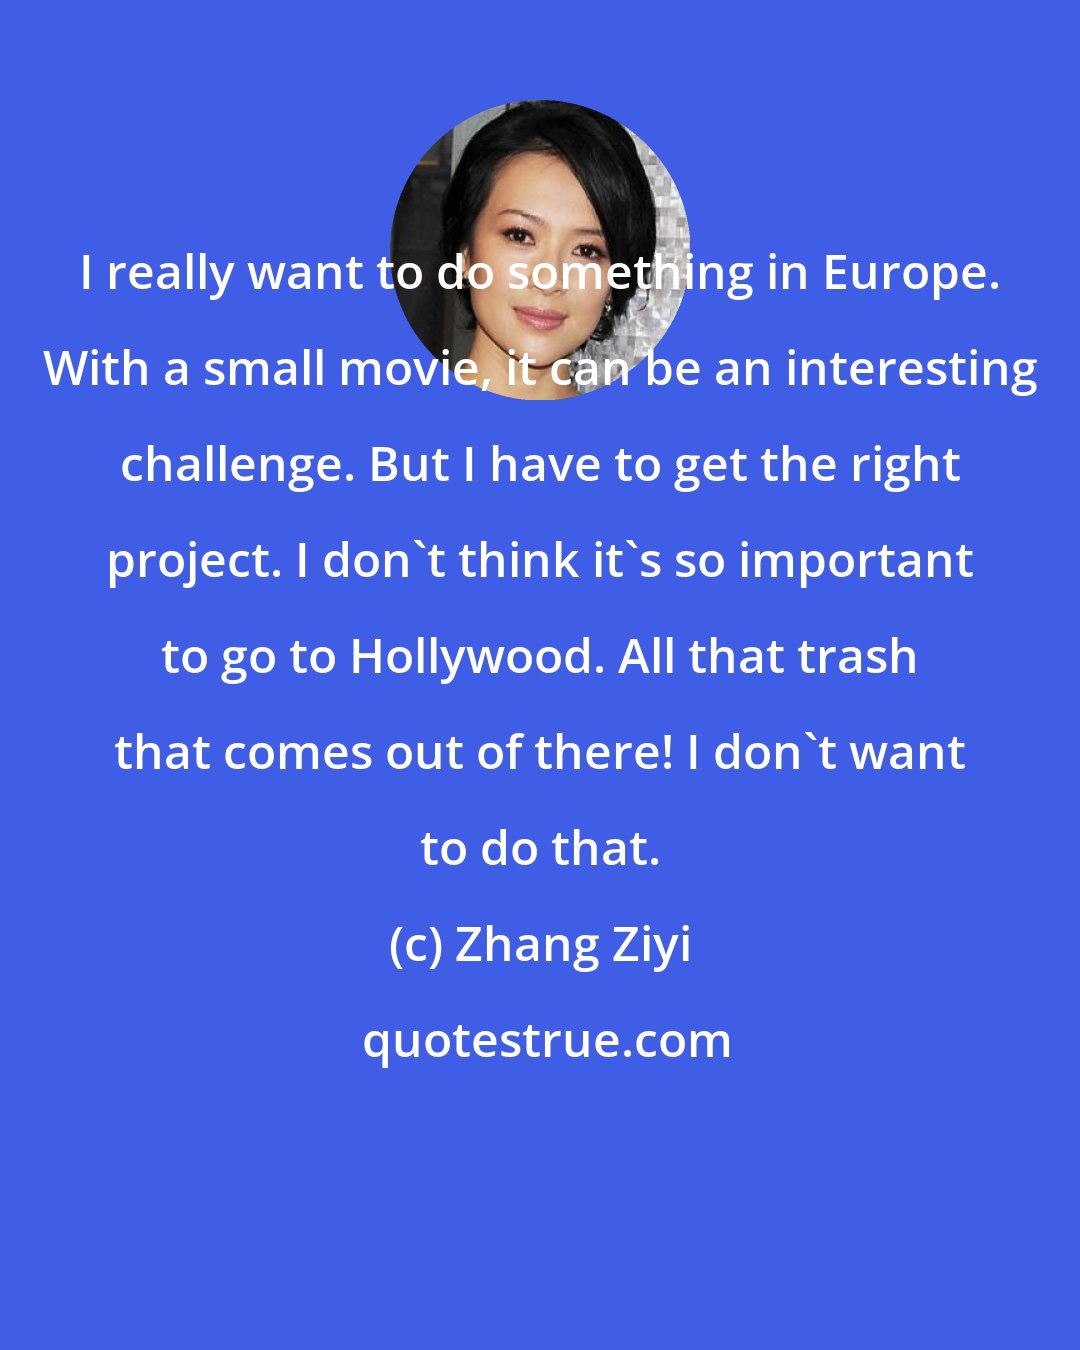 Zhang Ziyi: I really want to do something in Europe. With a small movie, it can be an interesting challenge. But I have to get the right project. I don't think it's so important to go to Hollywood. All that trash that comes out of there! I don't want to do that.